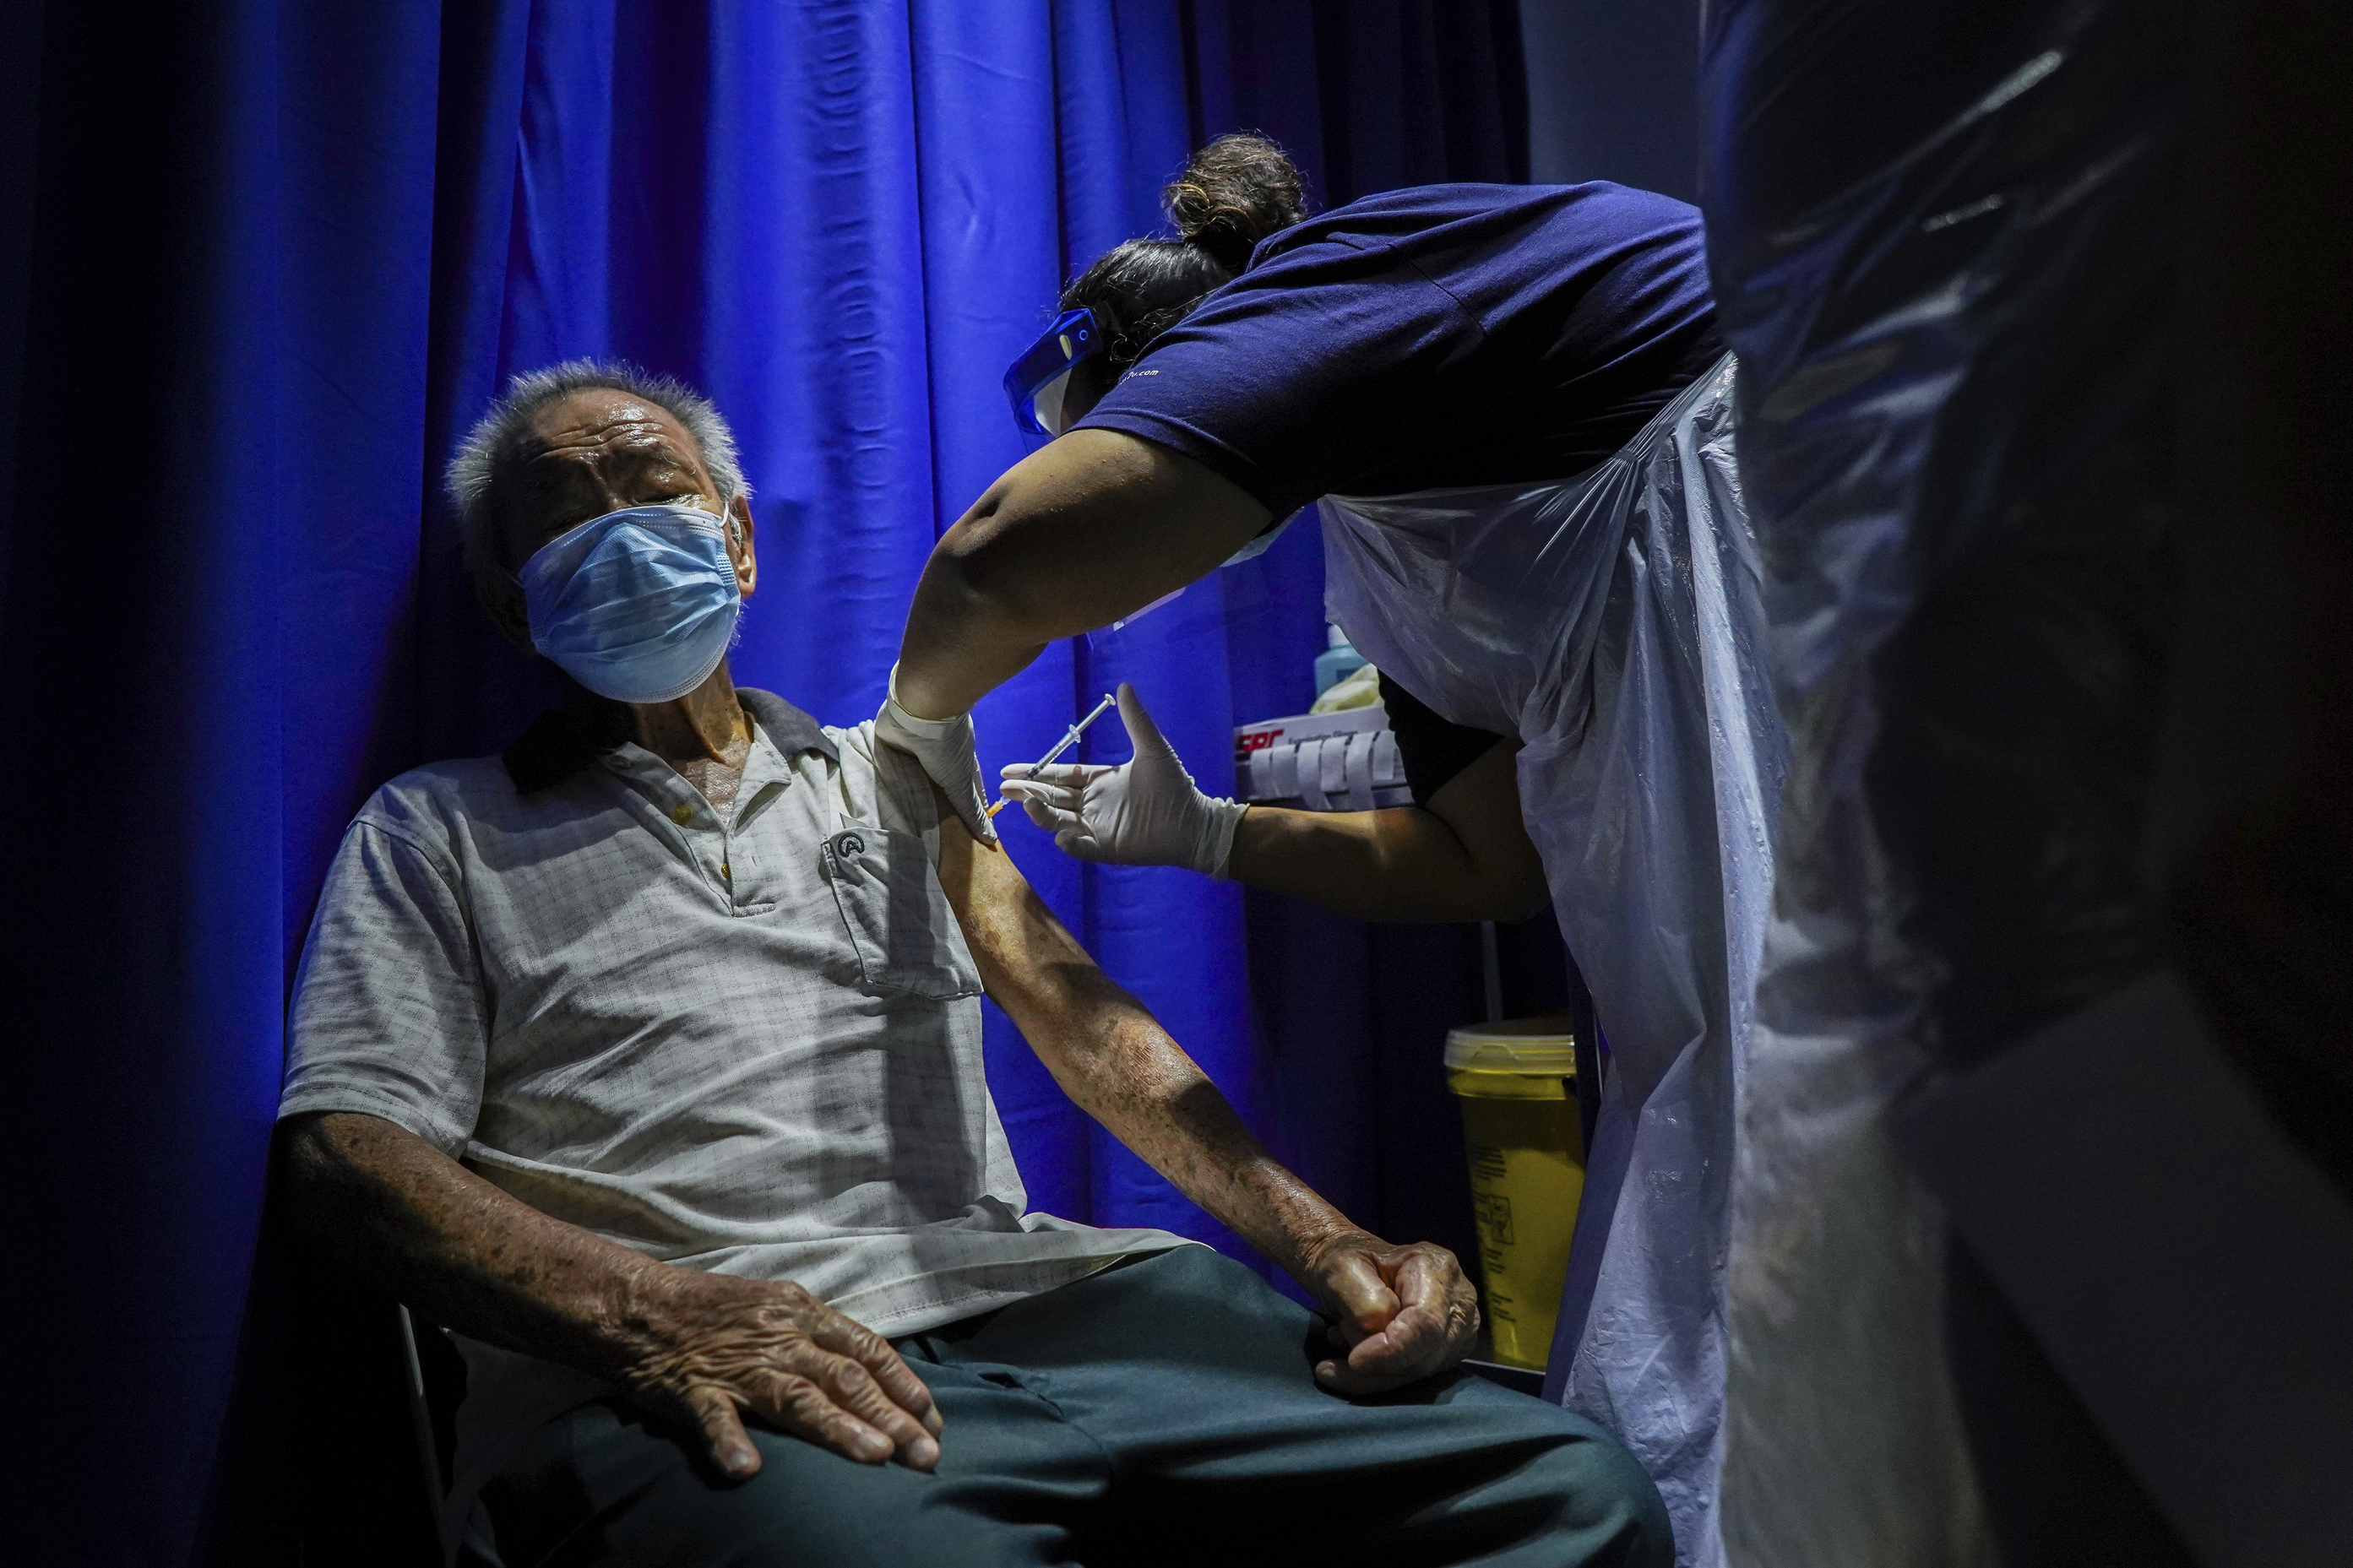 A healthcare worker administers a dose of a COVID-19 vaccine during mobile vaccination drive in Kuala Lumpur. Photo by Mohd Firdaus / AP